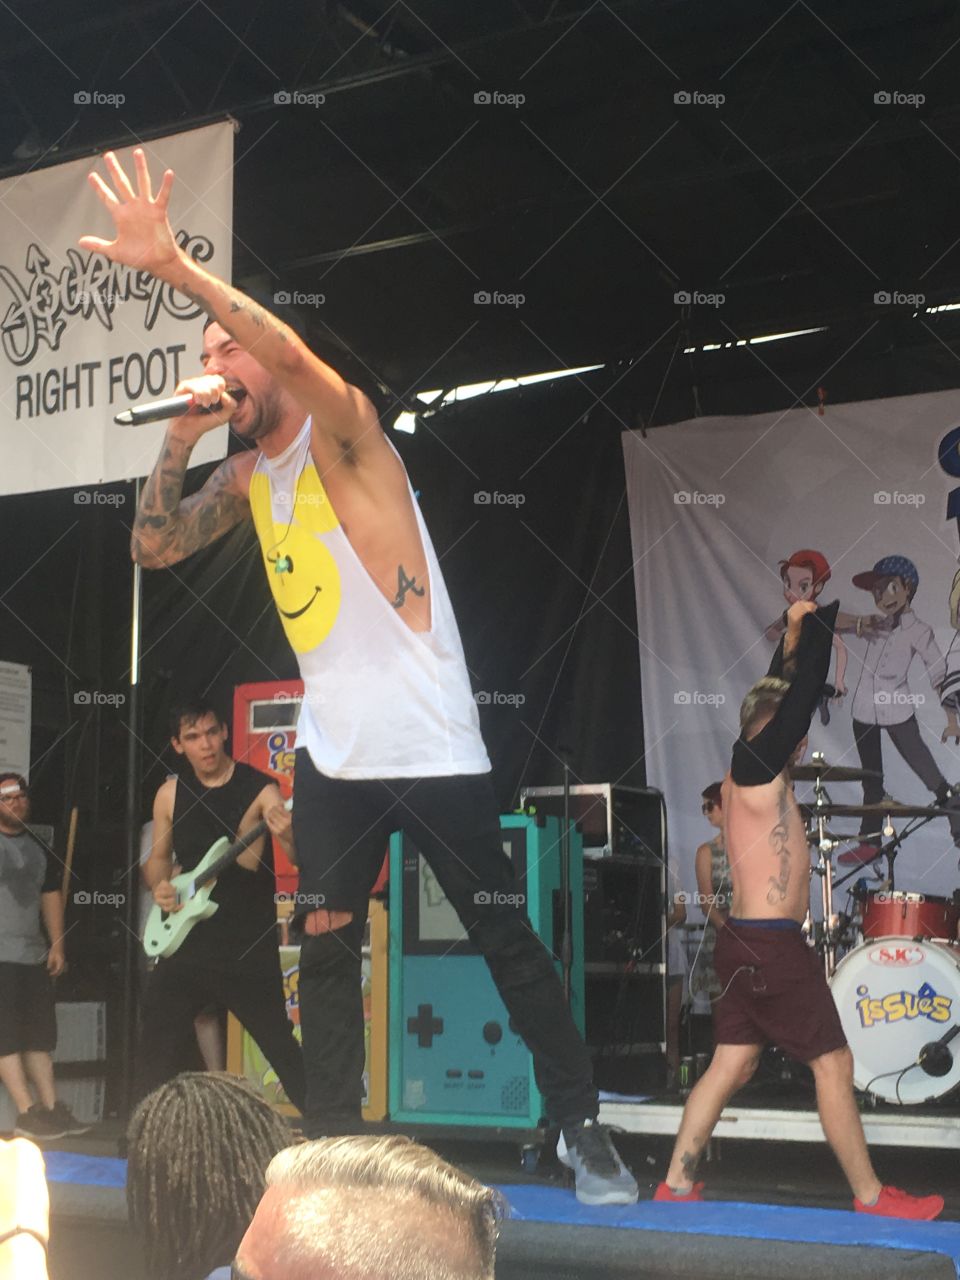 Issues at warped tour 2016